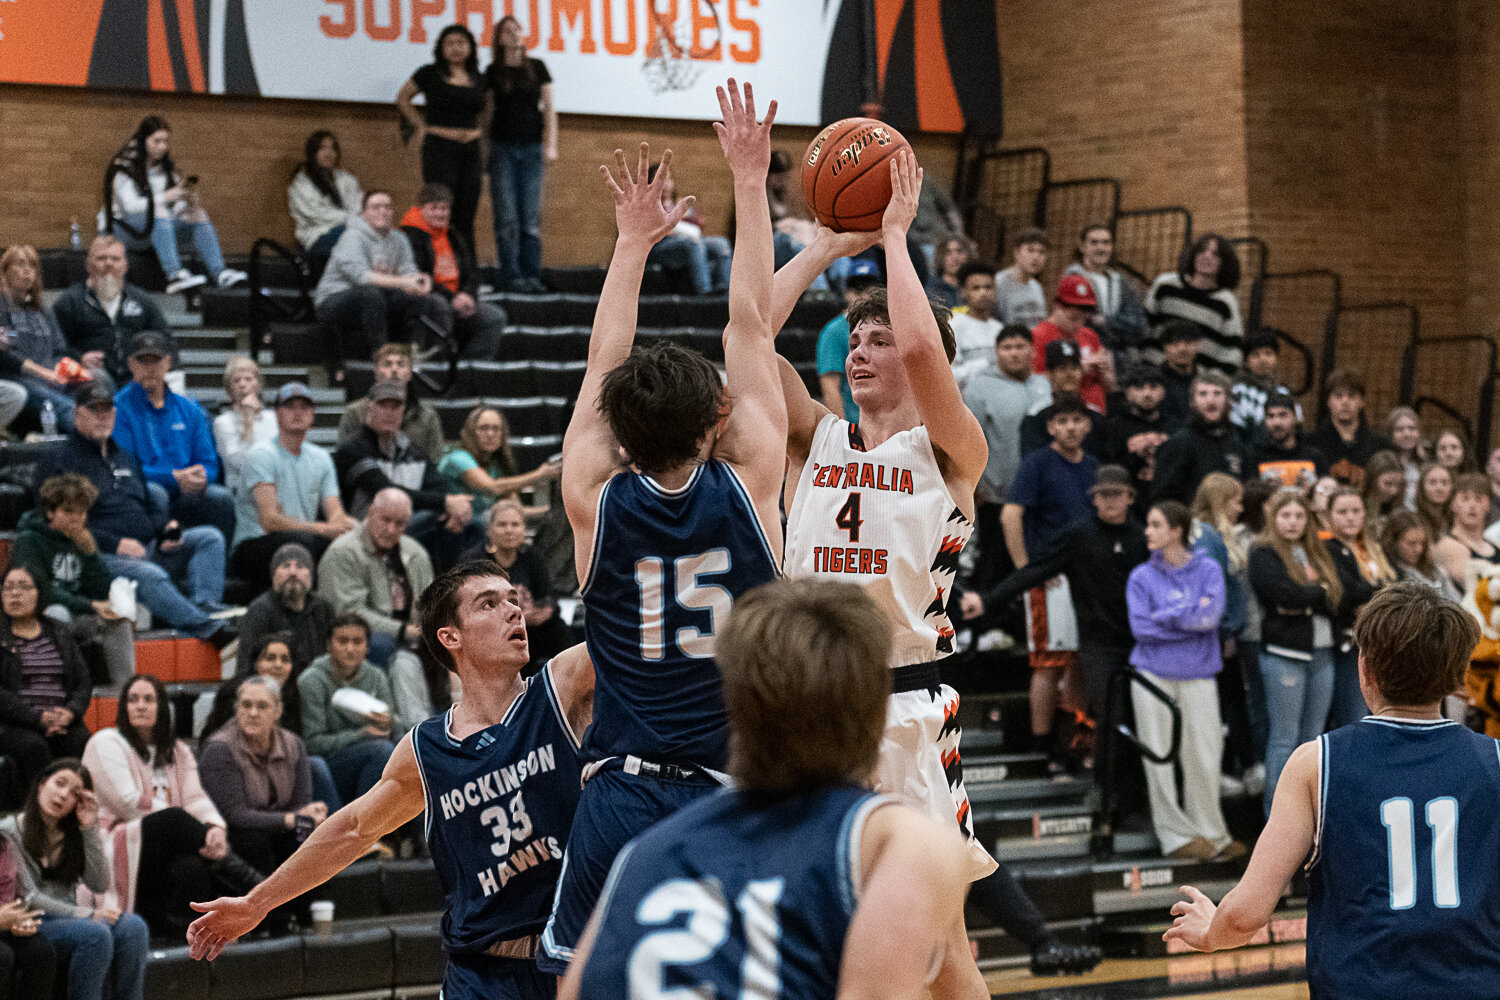 Aidan Haines shoots over multiple defenders during Centralia's loss against Hockinson on Nov. 27.